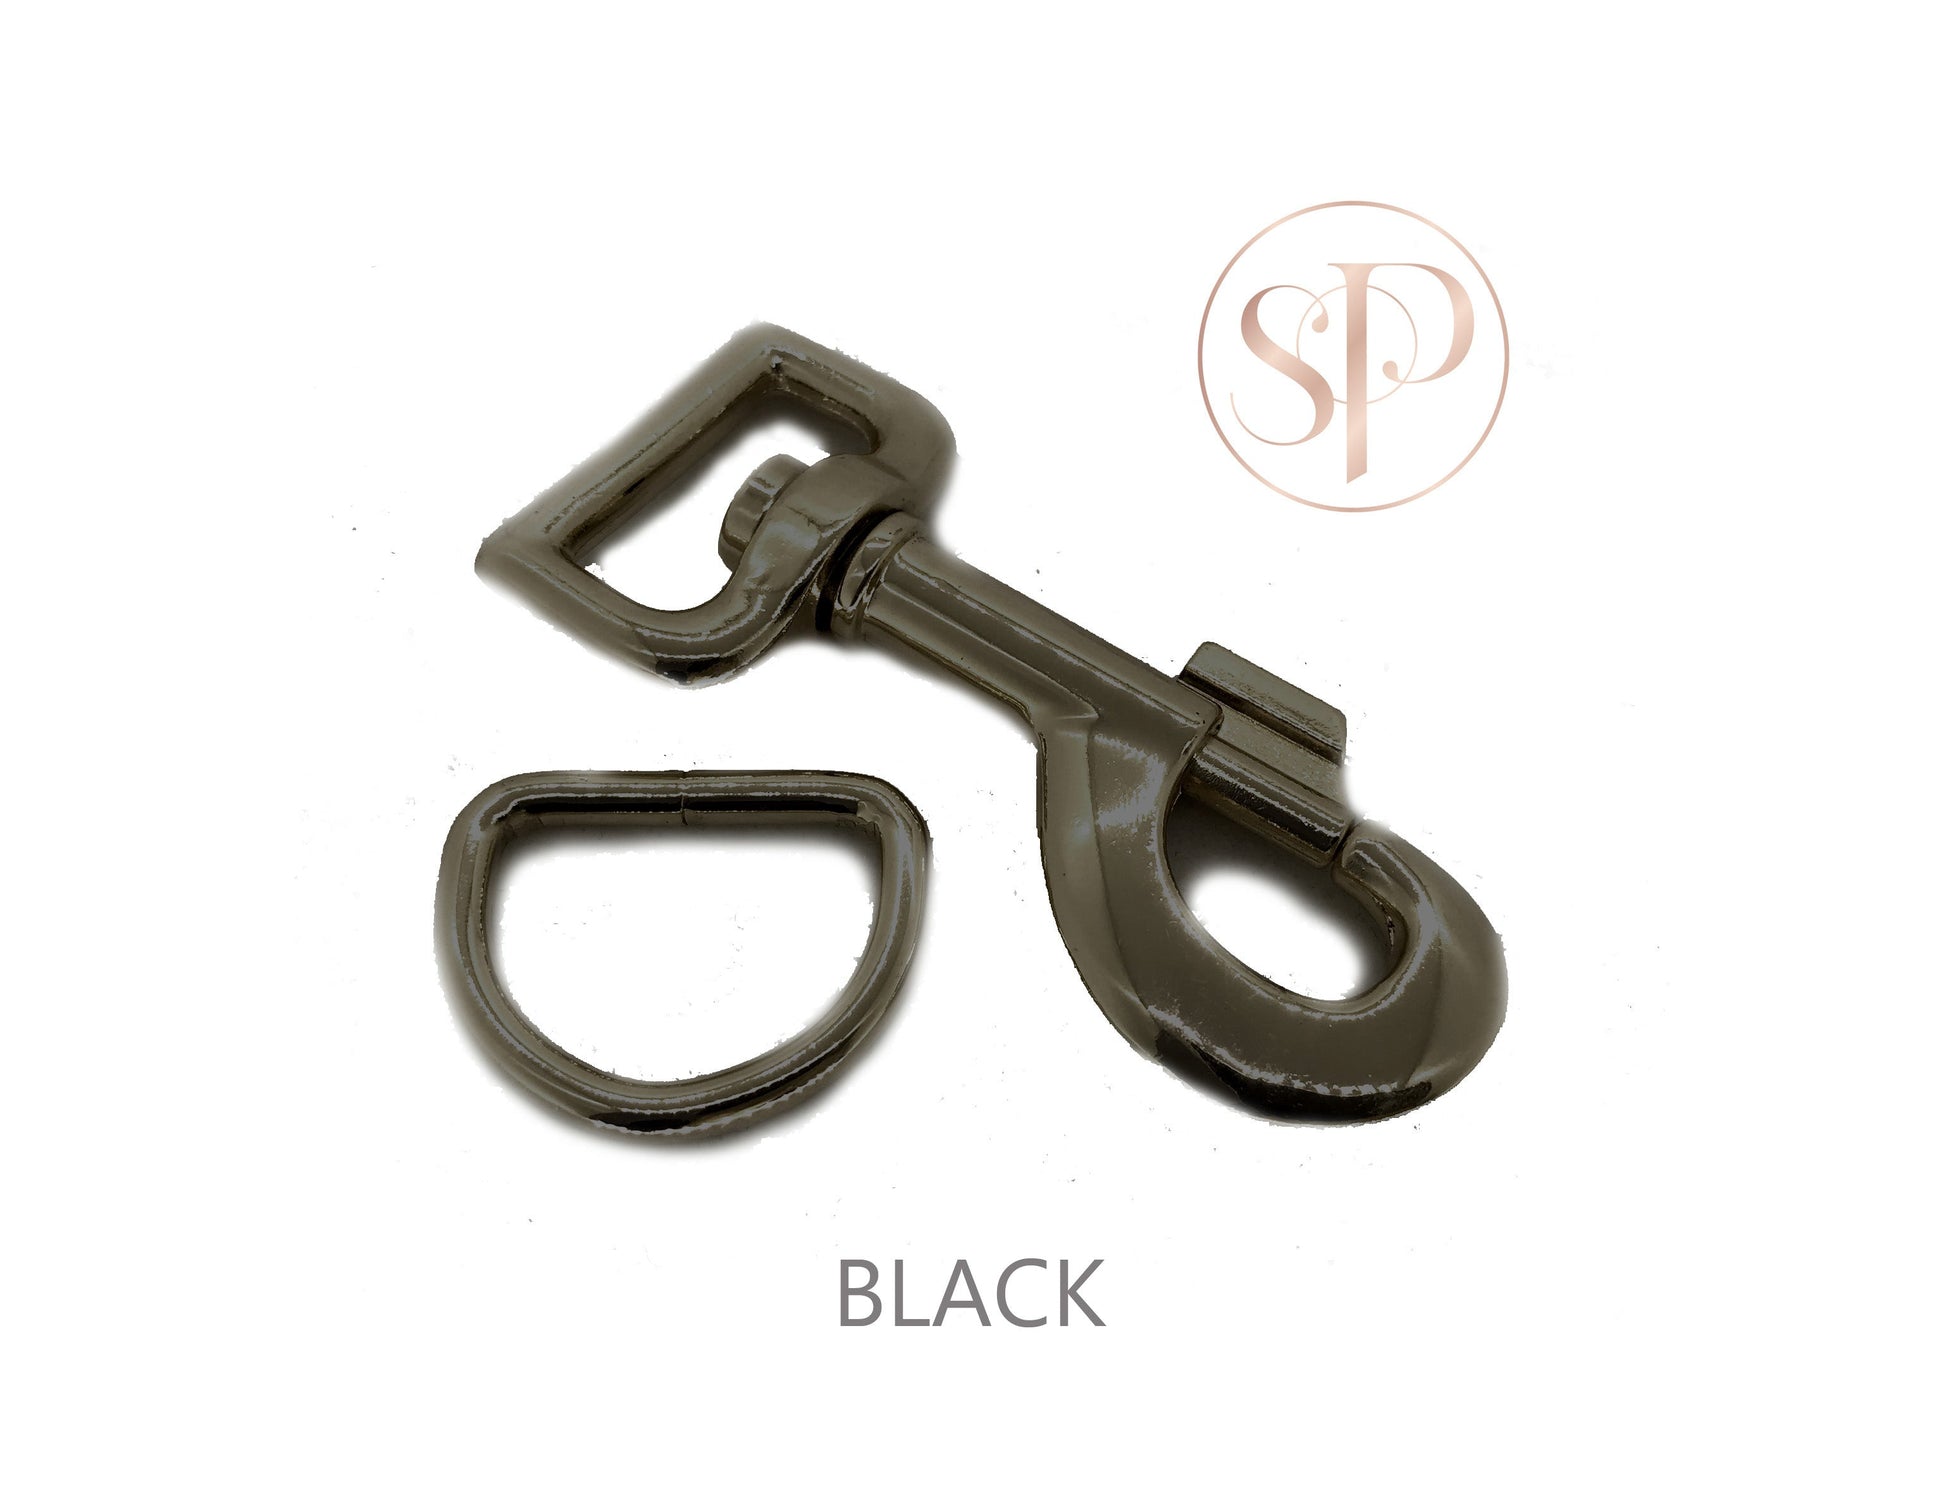 Black lead clasp and d-ring